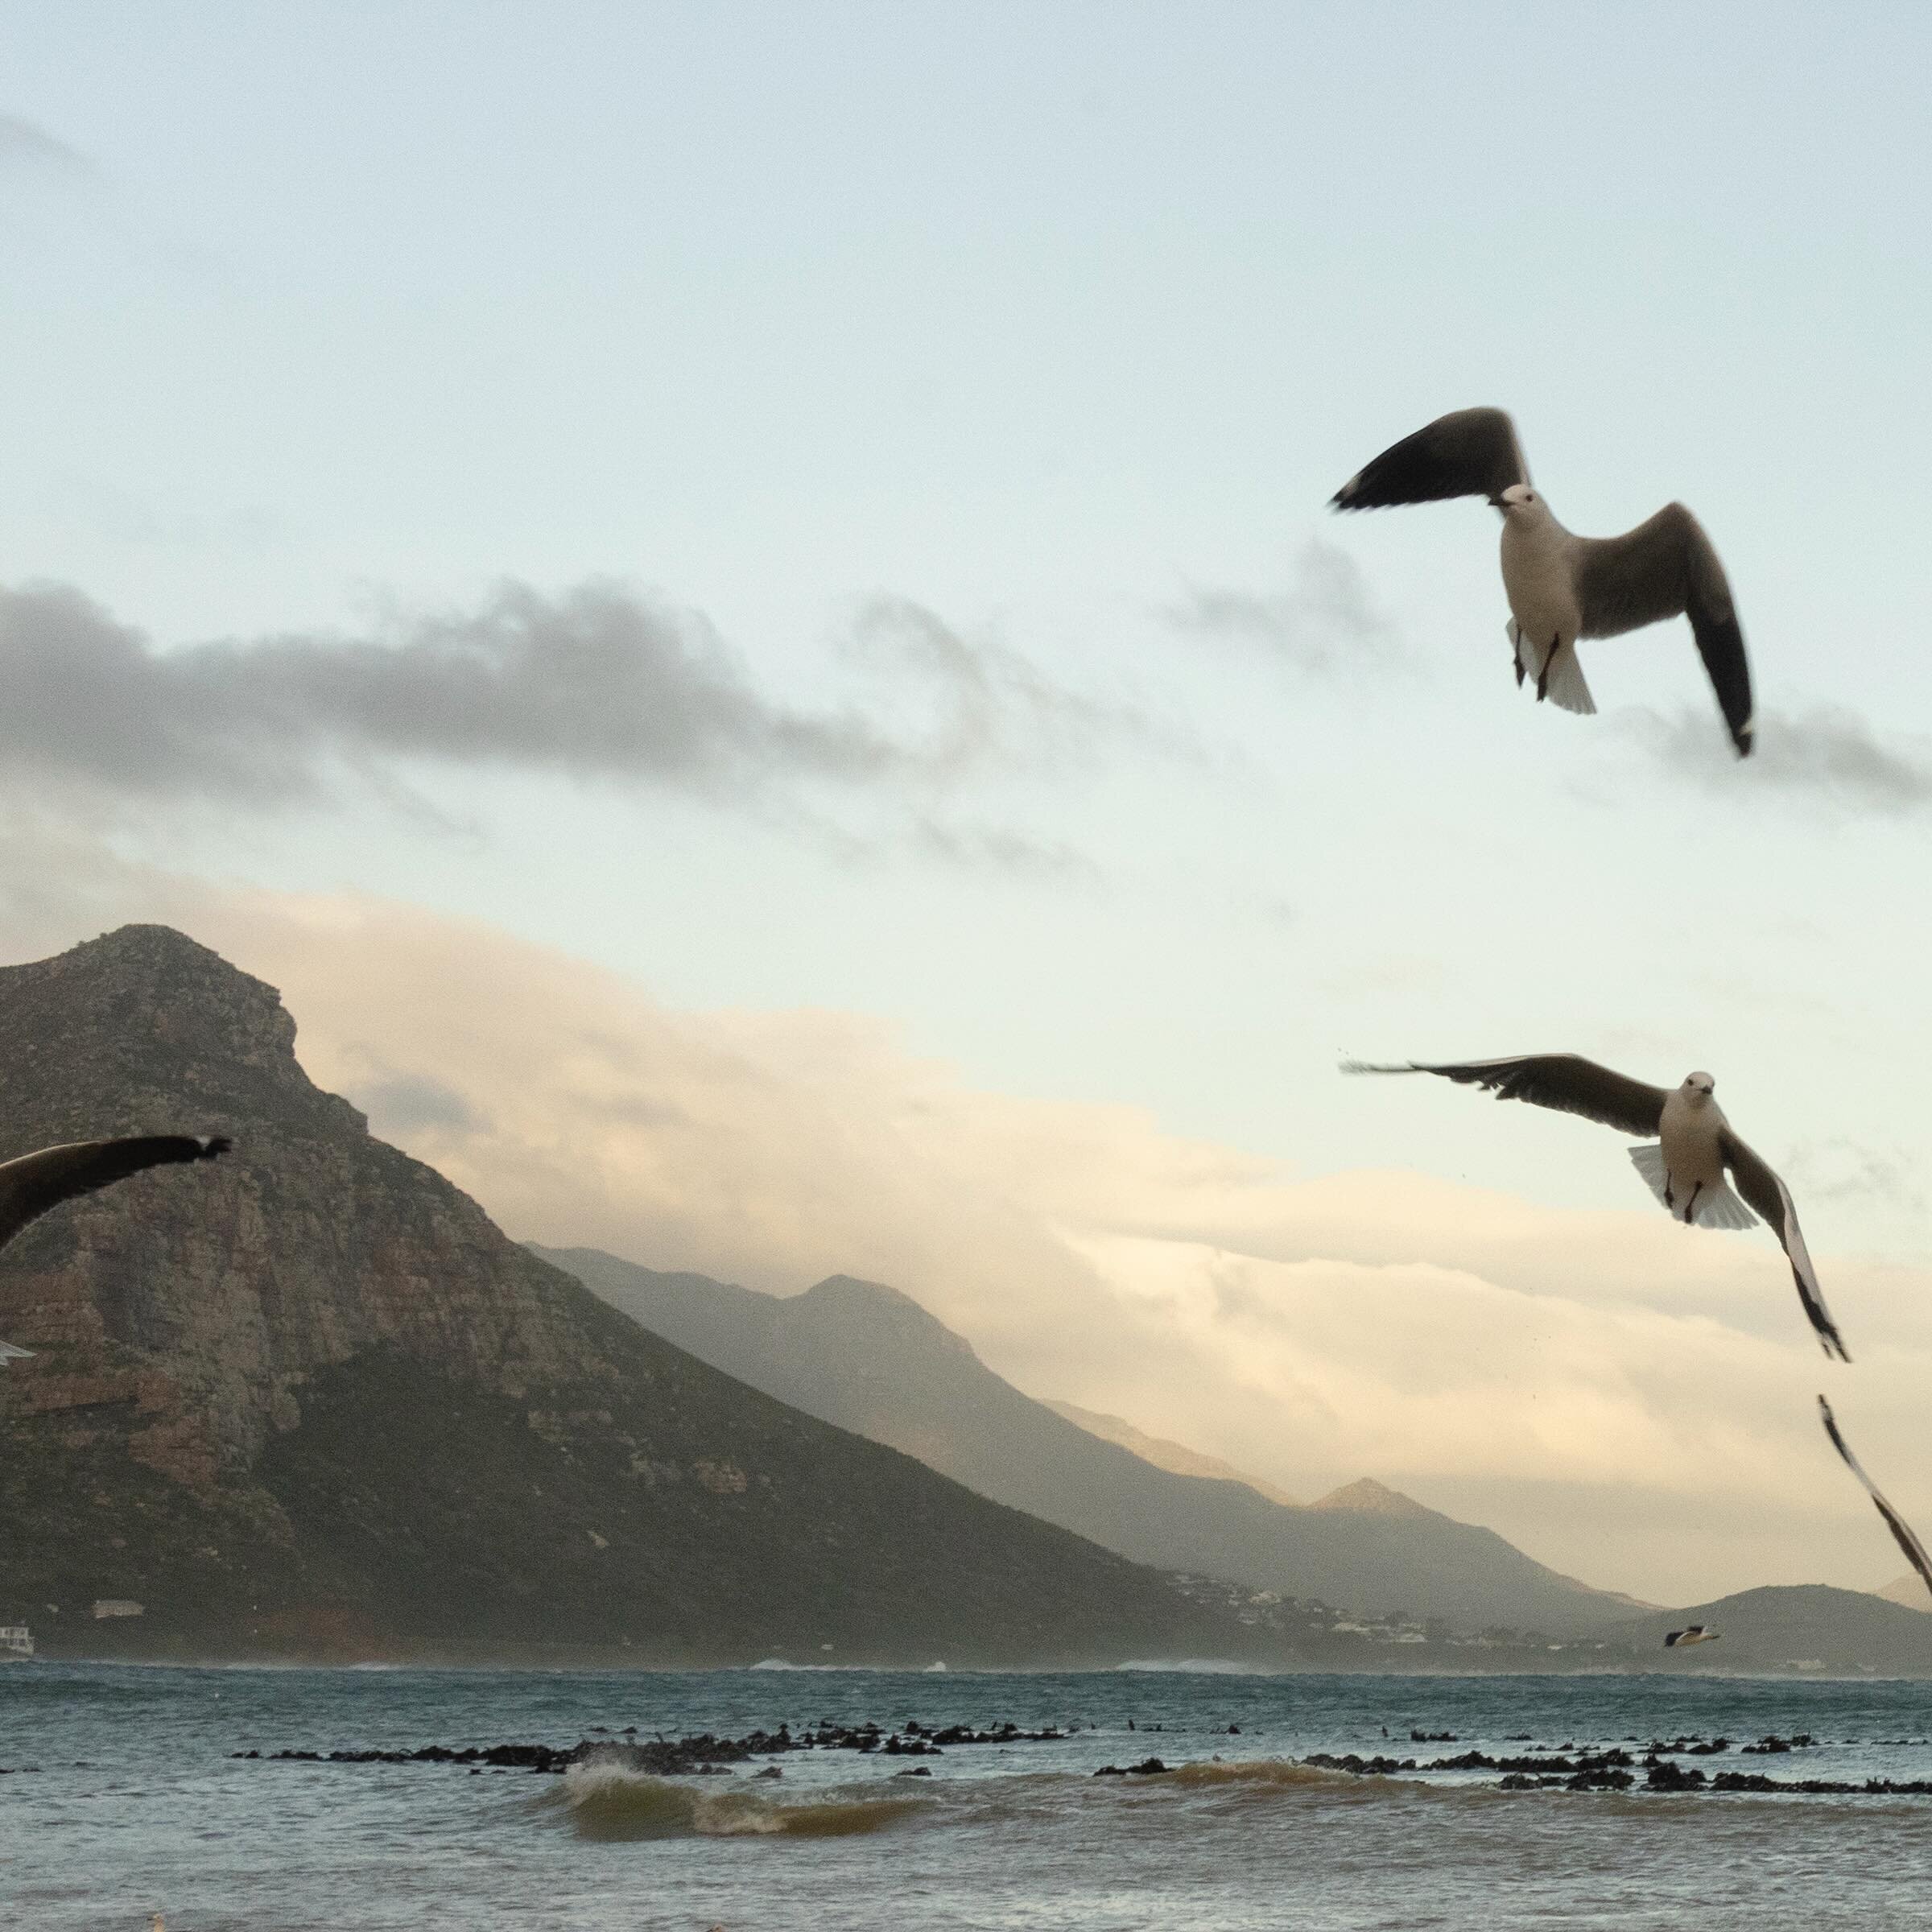 Seagulls feed at sunset next to kelp that has been washed up onto Witsand Beach outside of Cape Town, South Africa, June 16, 2023. Sea birds often use the kelp for nest sites. Adriane Ohanesian for the Bulletin of the Atomic Scientists

Text by Paul 